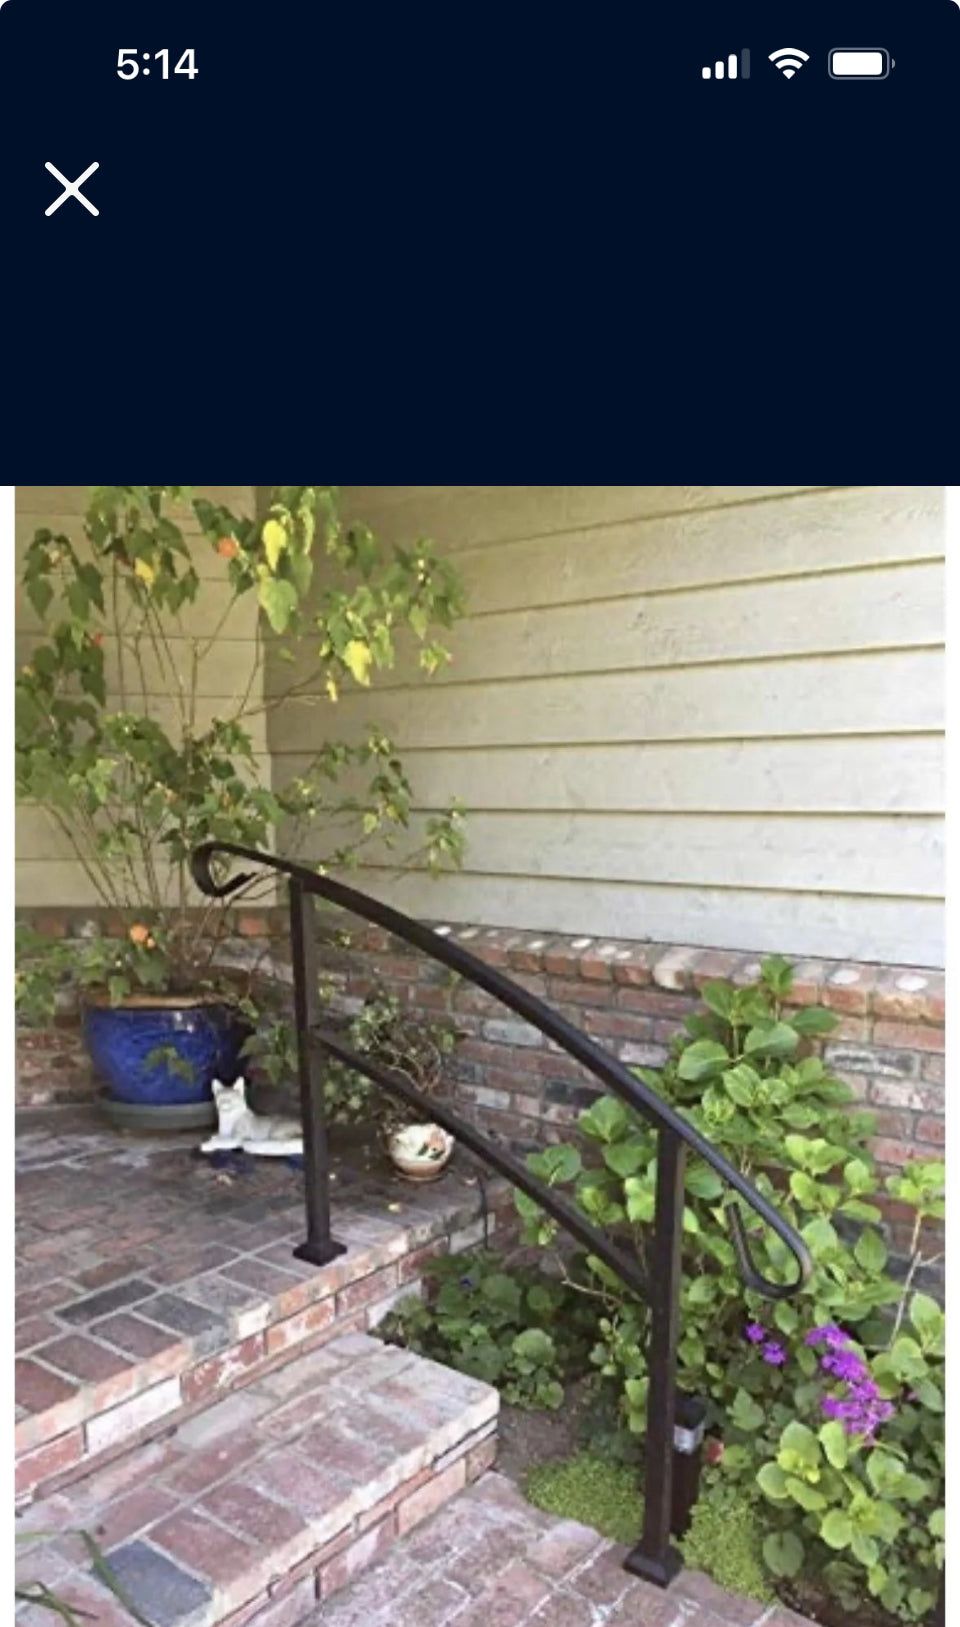 Handrails for Outdoor Steps,3 Step Handrail Fits 1 to 3 Steps Mattle Wrought It’sz - Selzalot